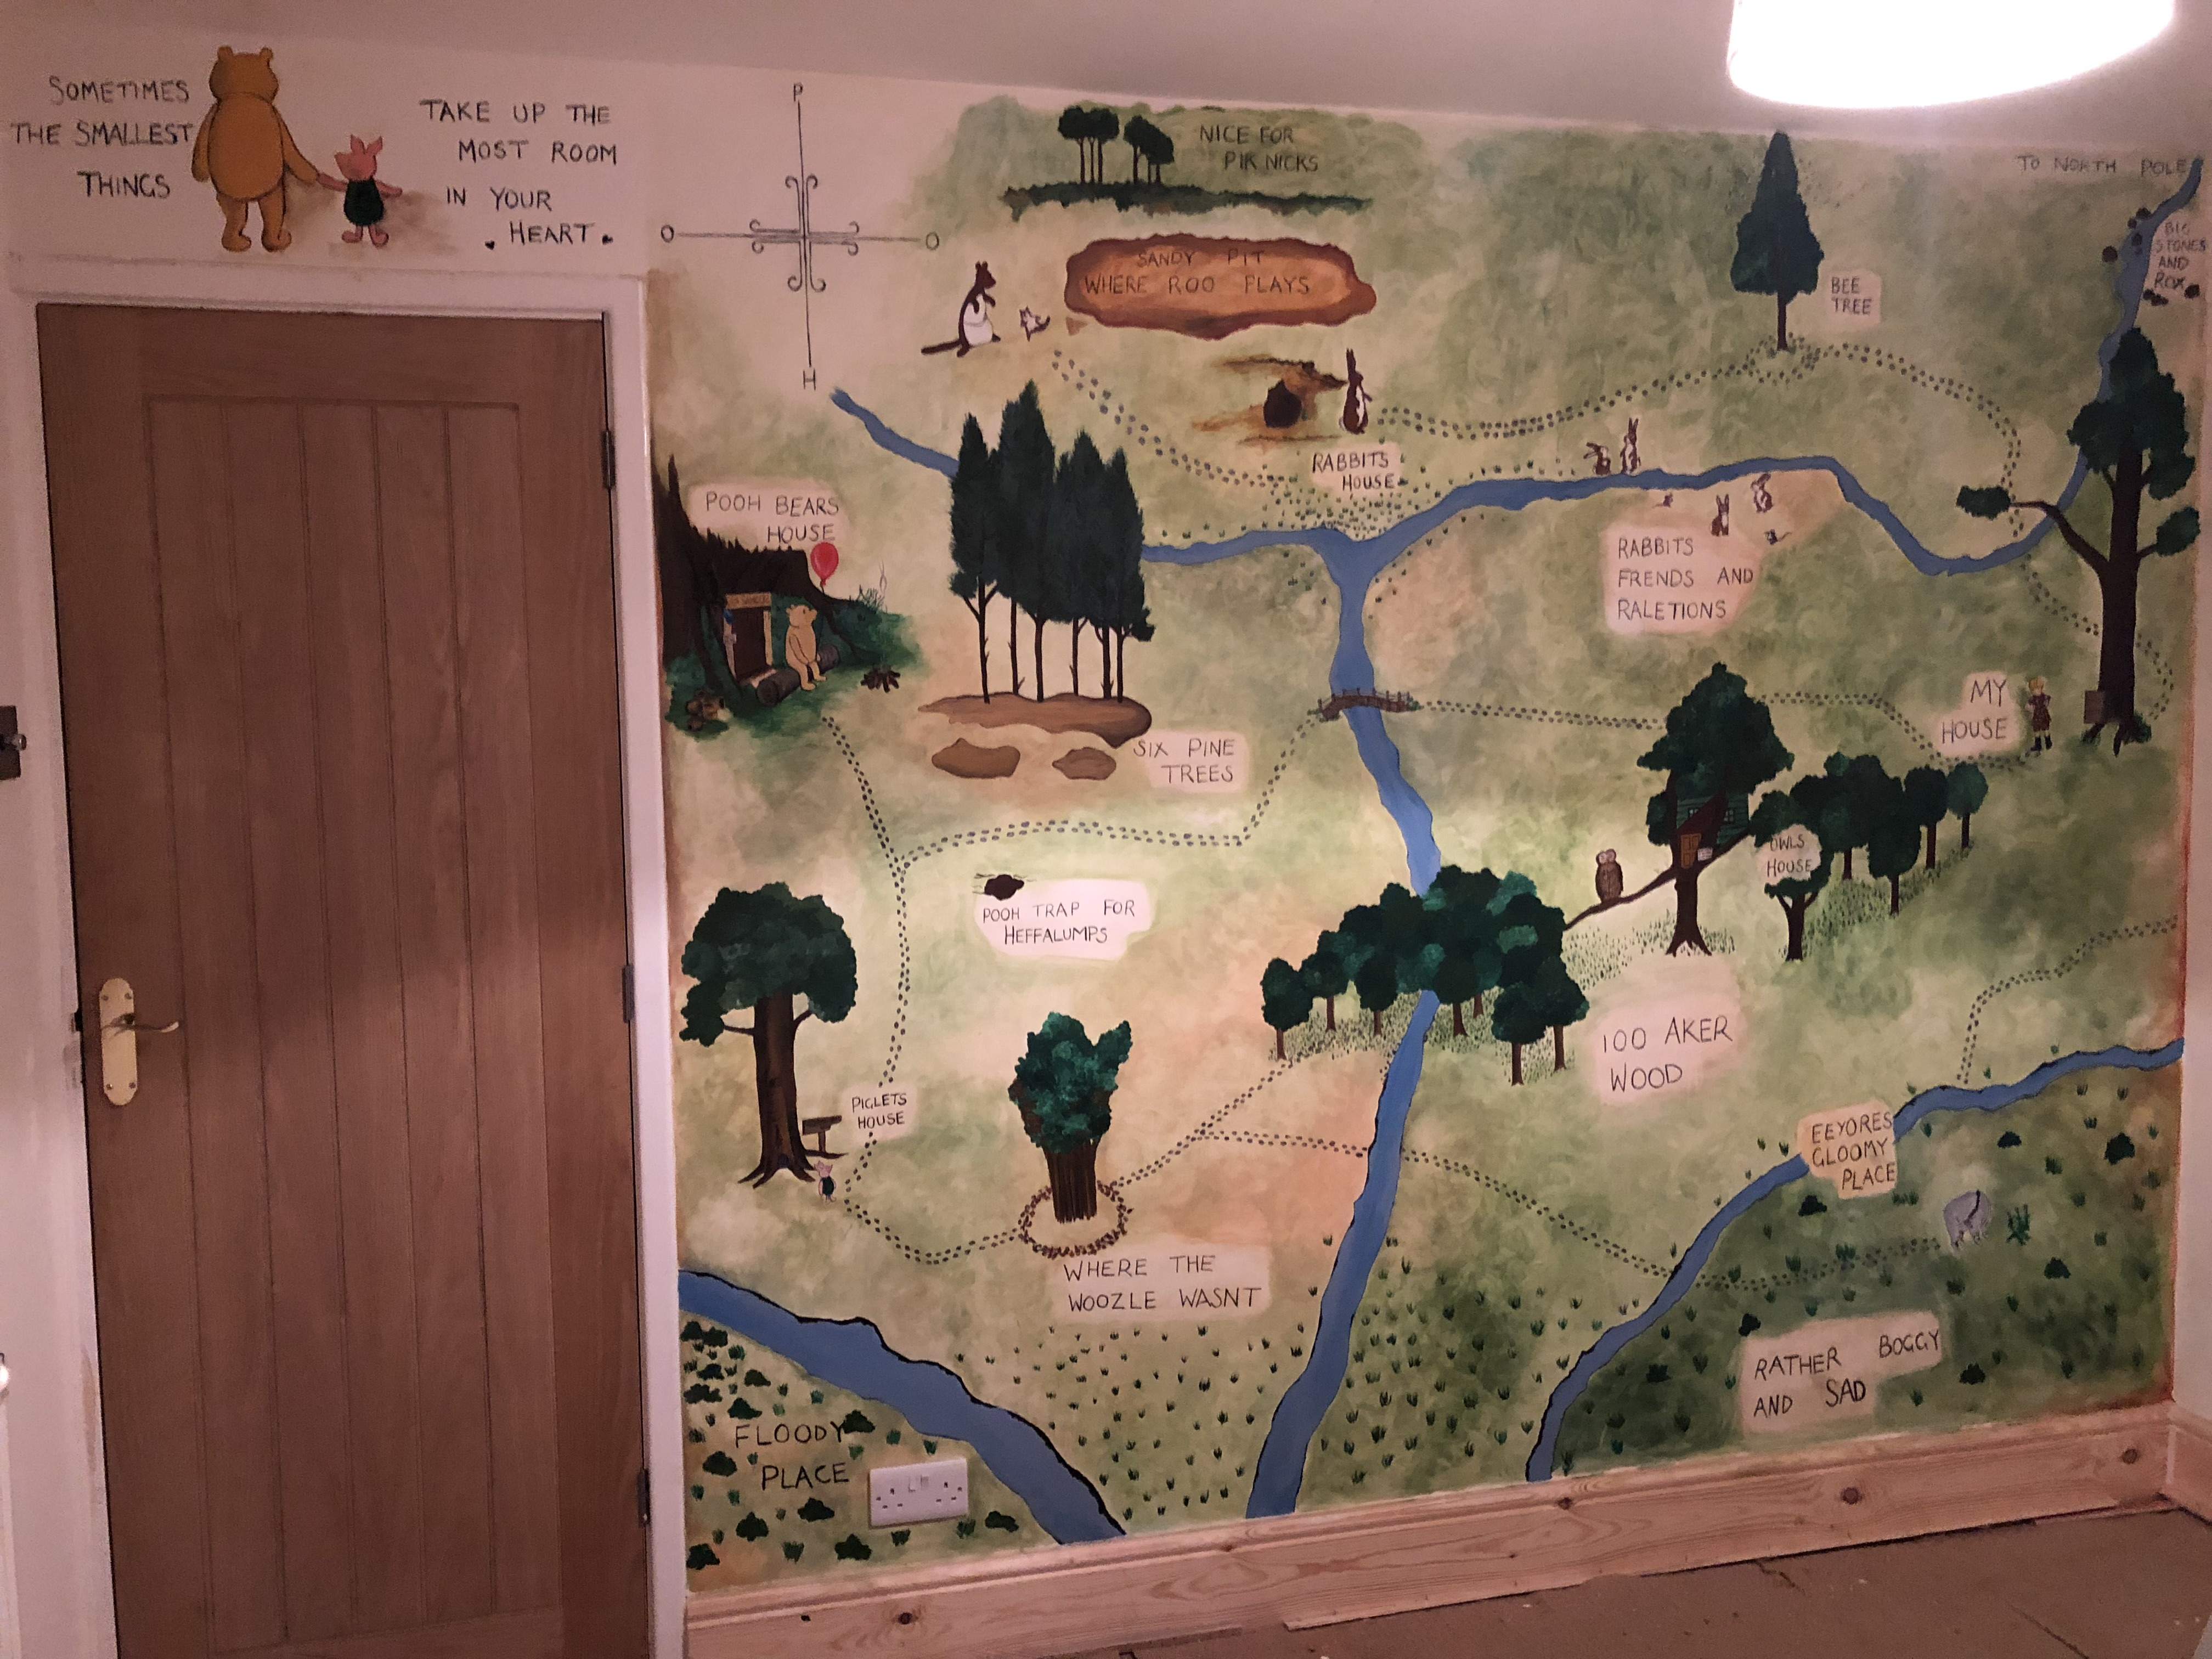 100 Aker woods Map hand painted by Akers of Art